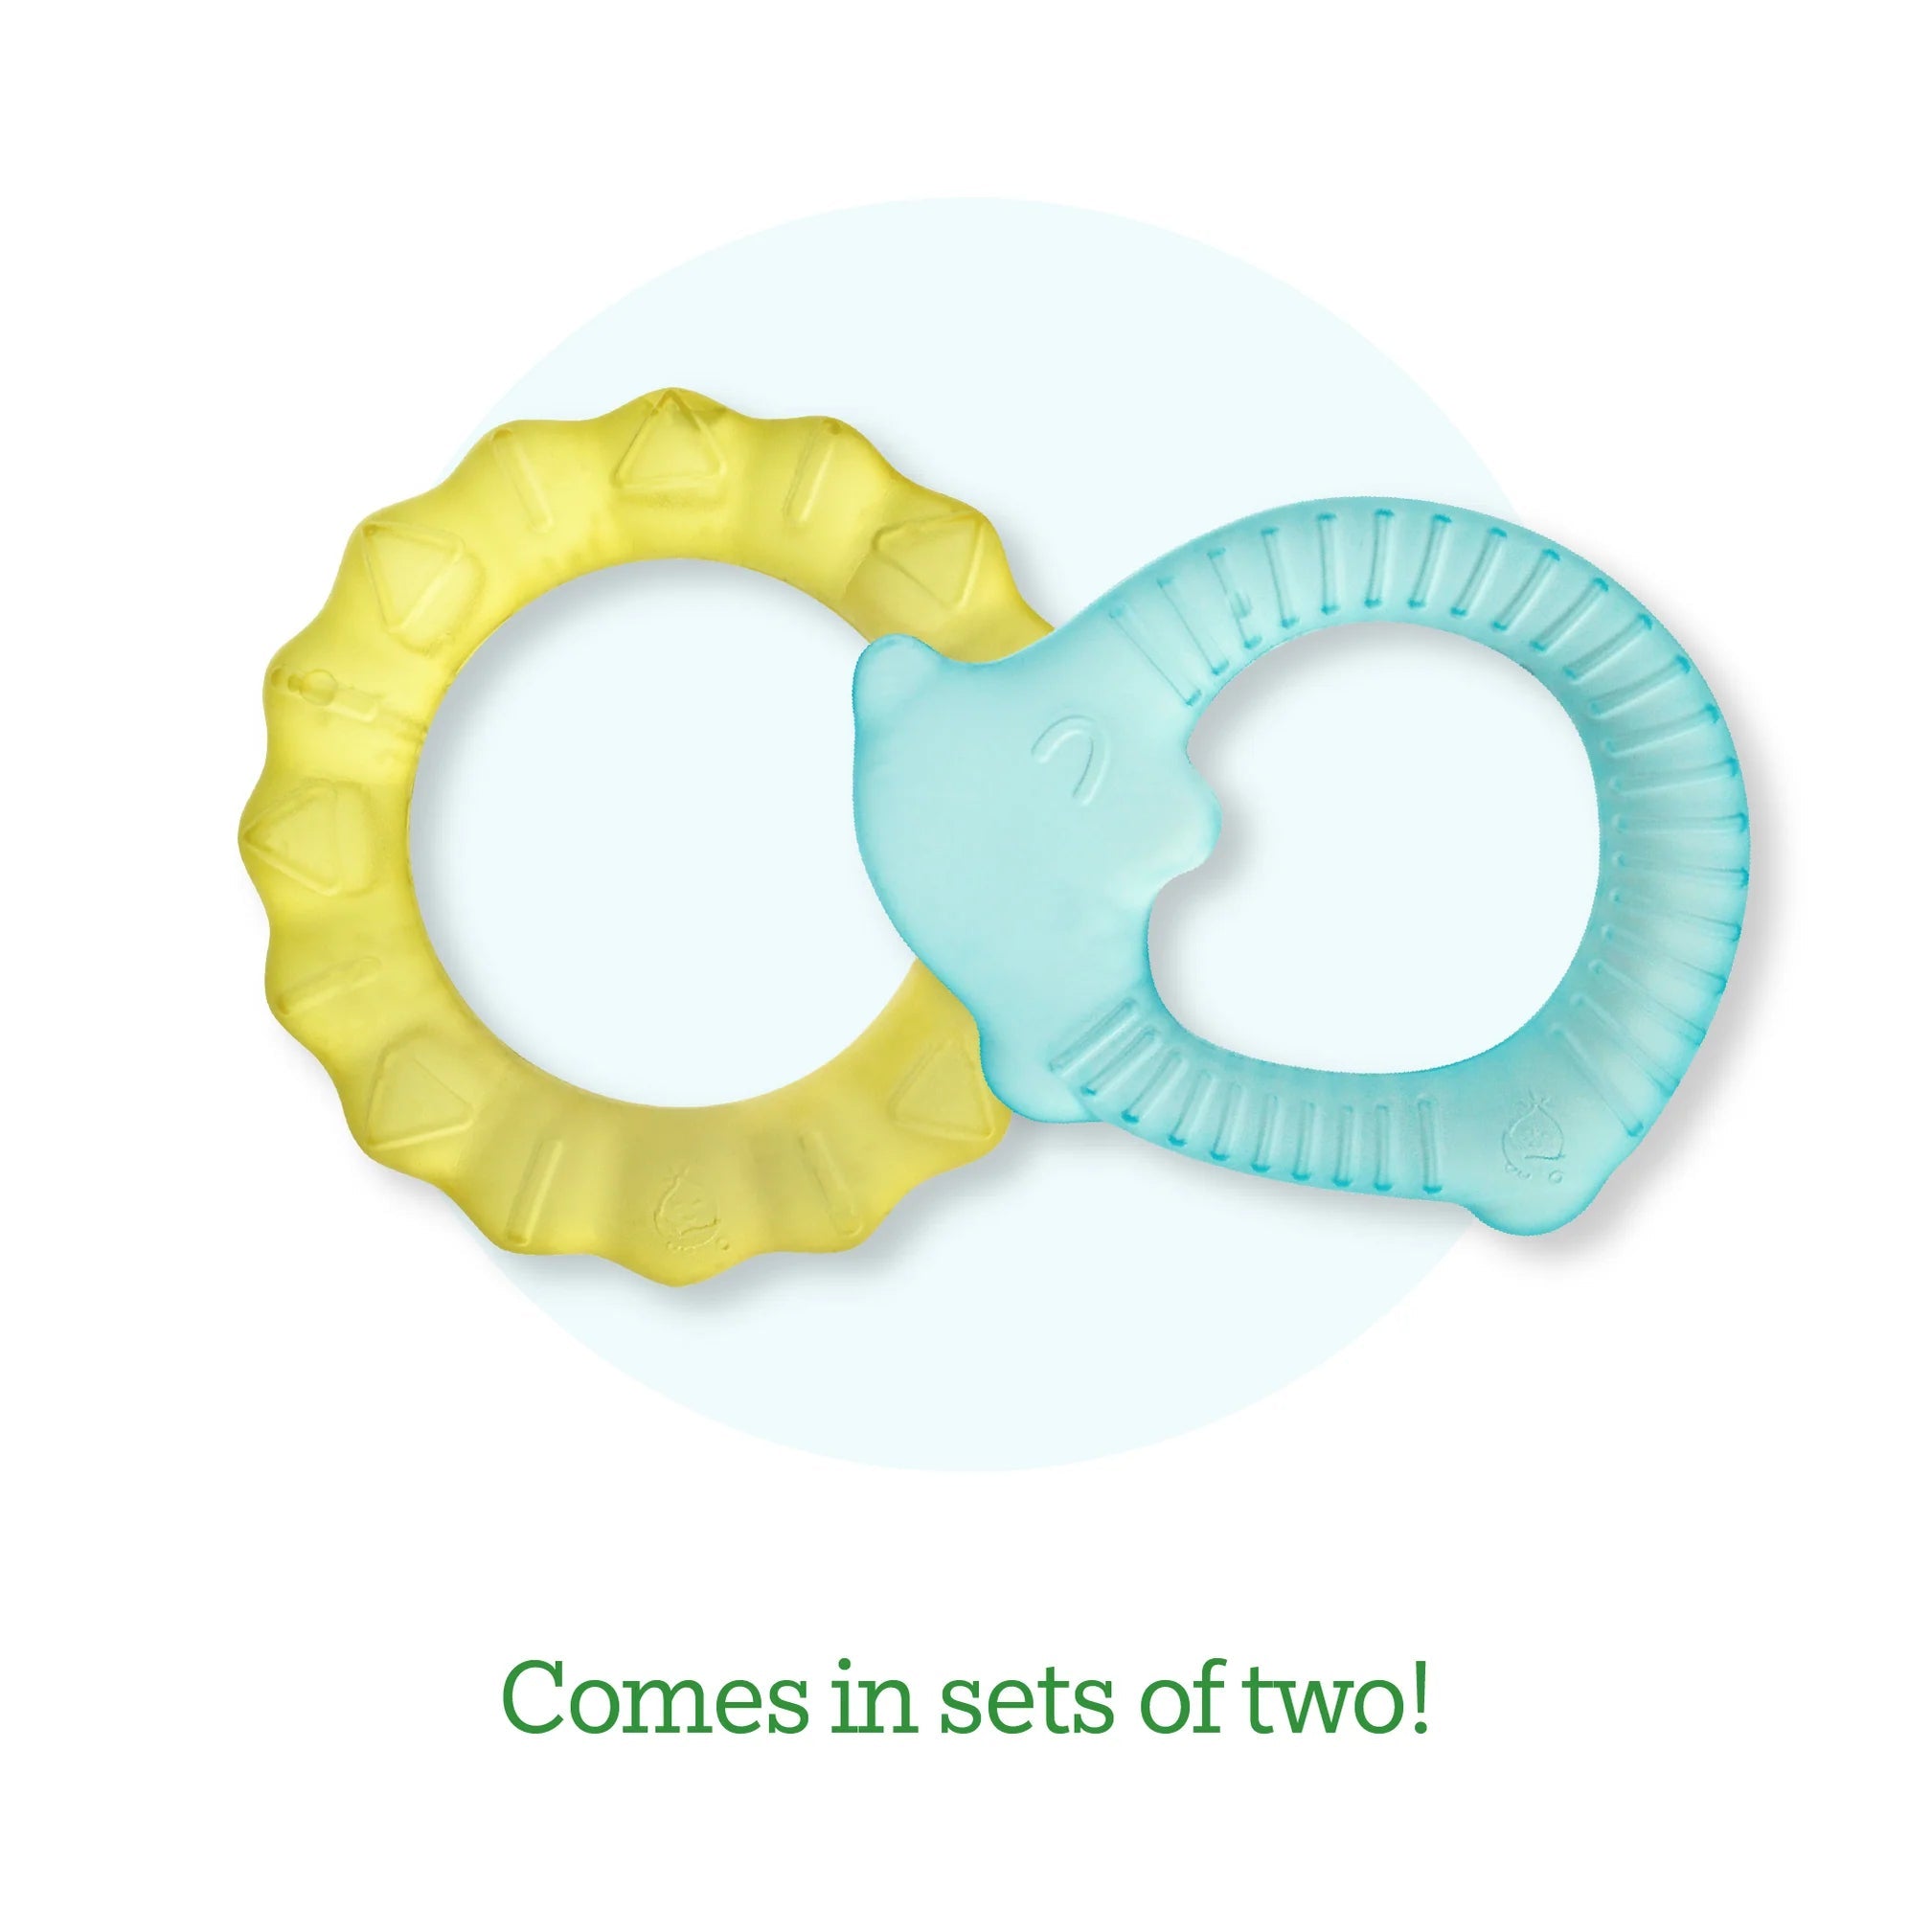 Green Sprouts Cool Nature Teethers (2 pack) - Aqua/Yellow Set-Green Sprouts-Little Giant Kidz